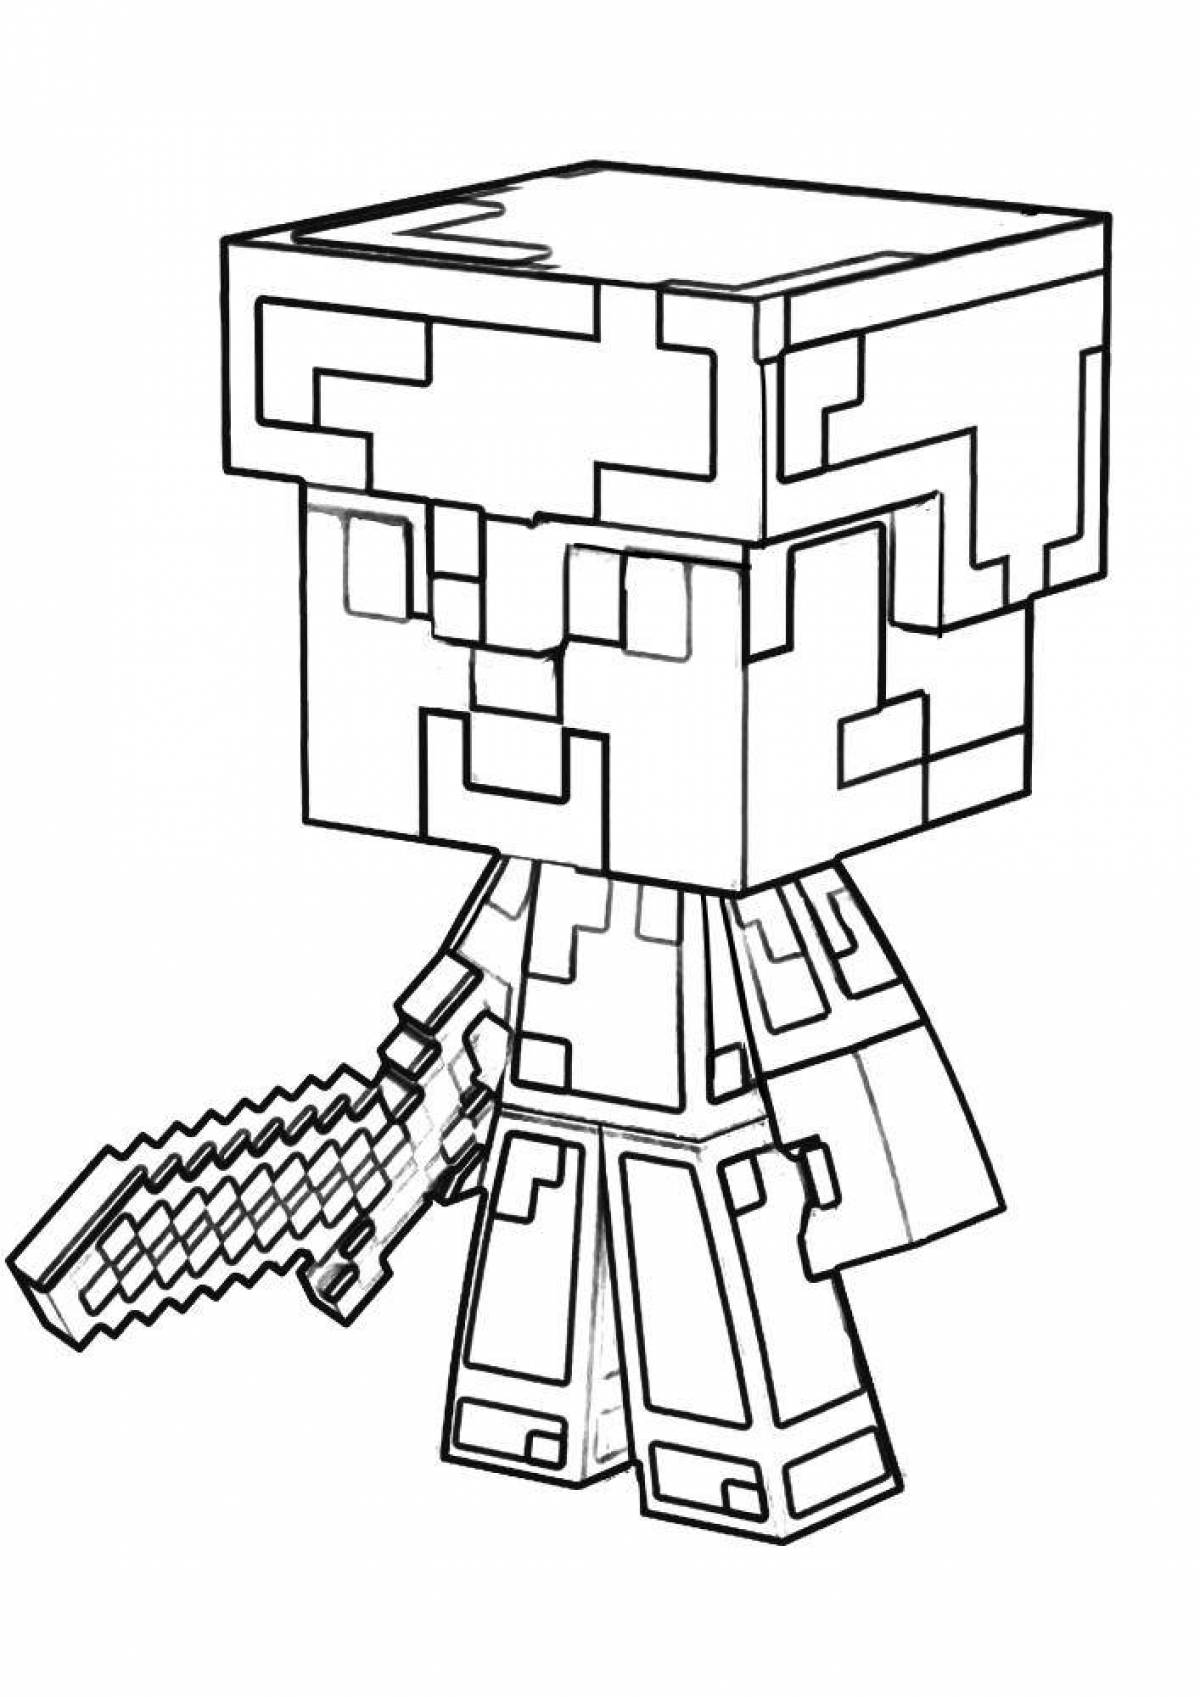 Colorful minecraft men coloring pages